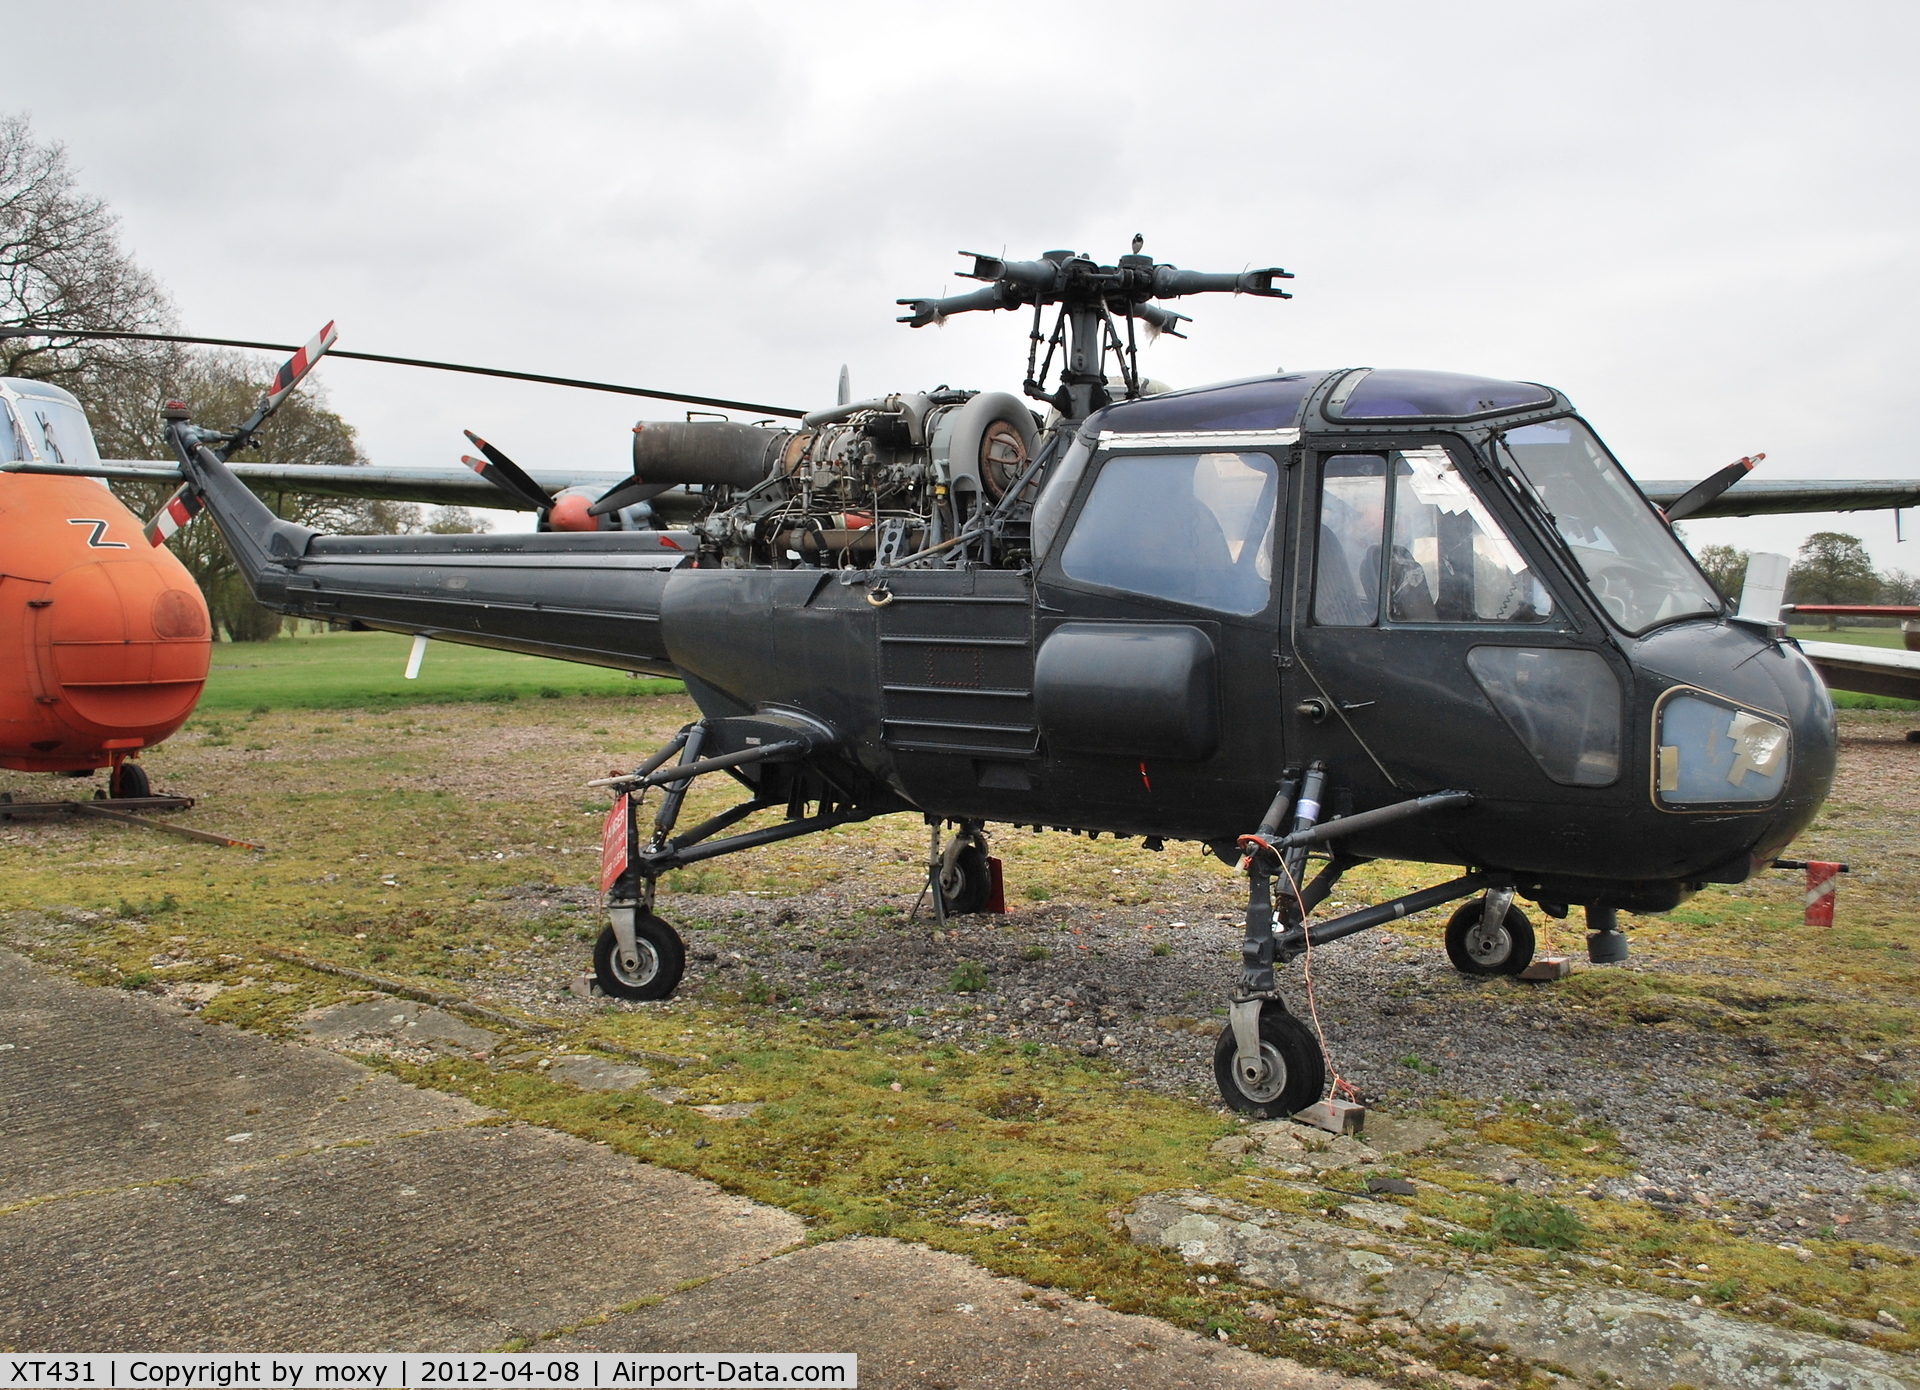 XT431, 1965 Westland Wasp HAS.1 C/N F9601, Westland Wasp HAS.1 at the Gatwick Aviation Museum. Marked as XS463